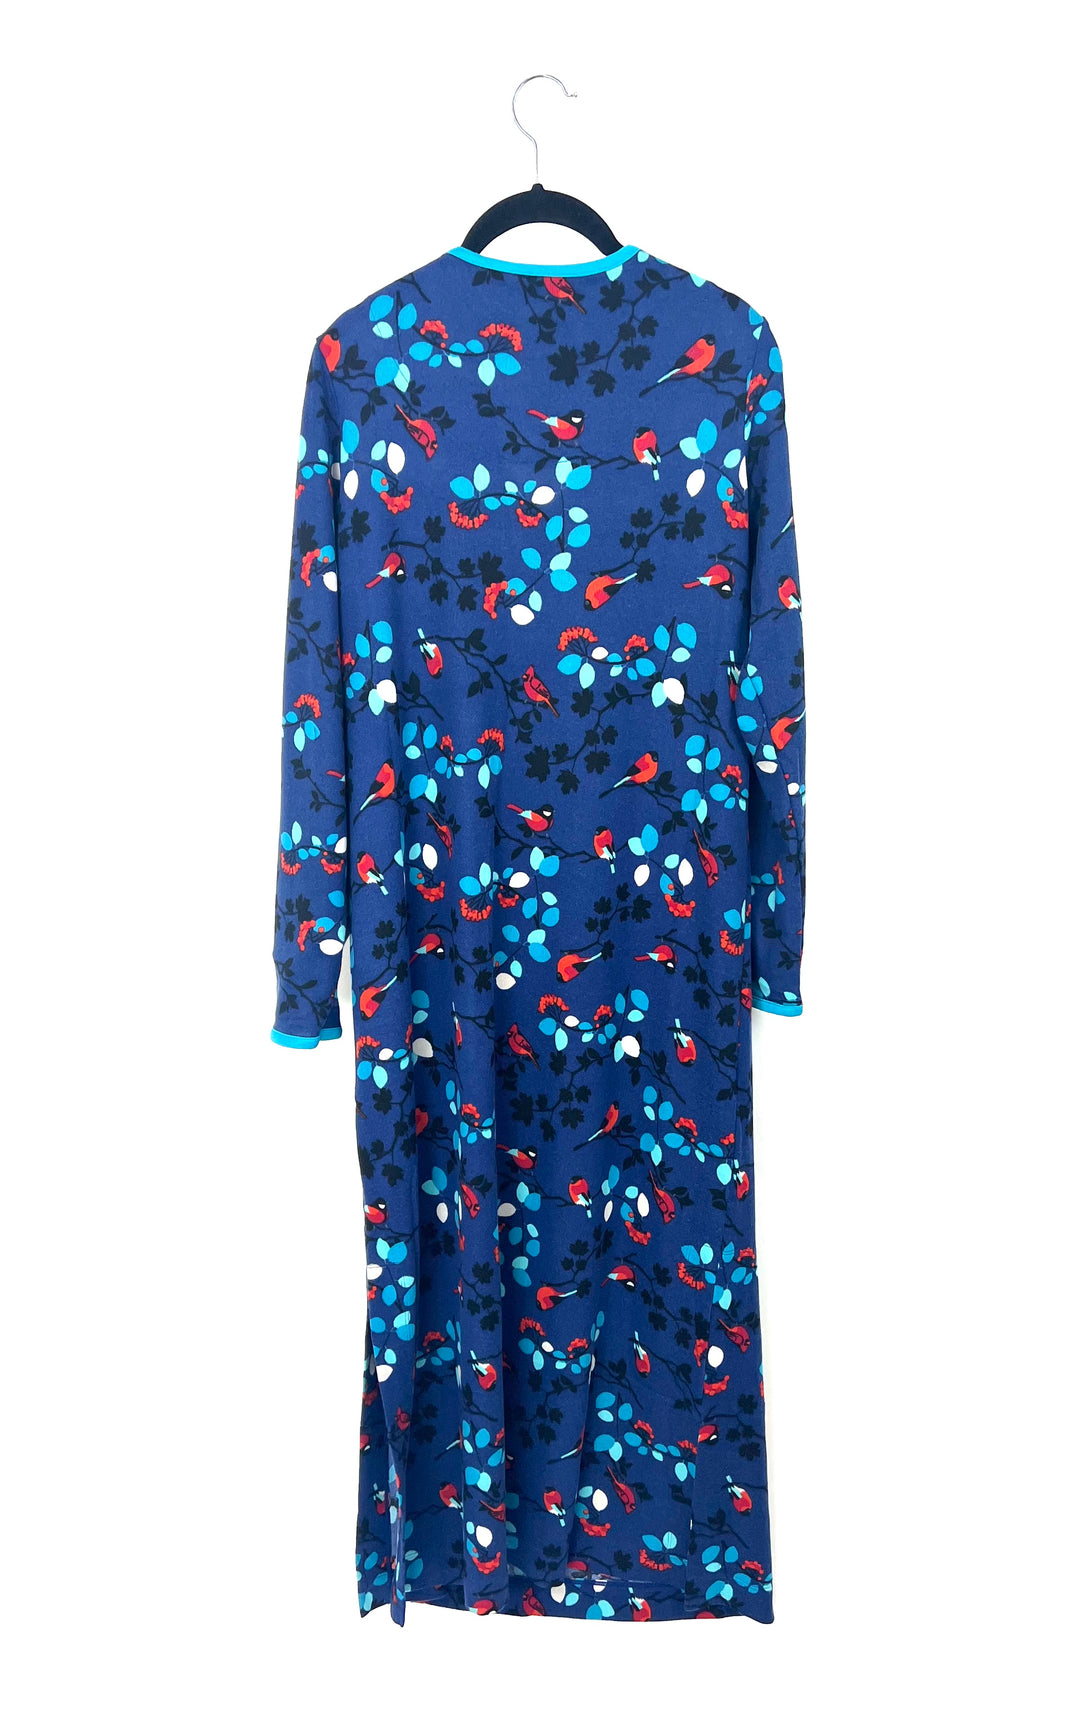 Royal Blue Printed Lounge Dress - Size 6/8 And 10/12